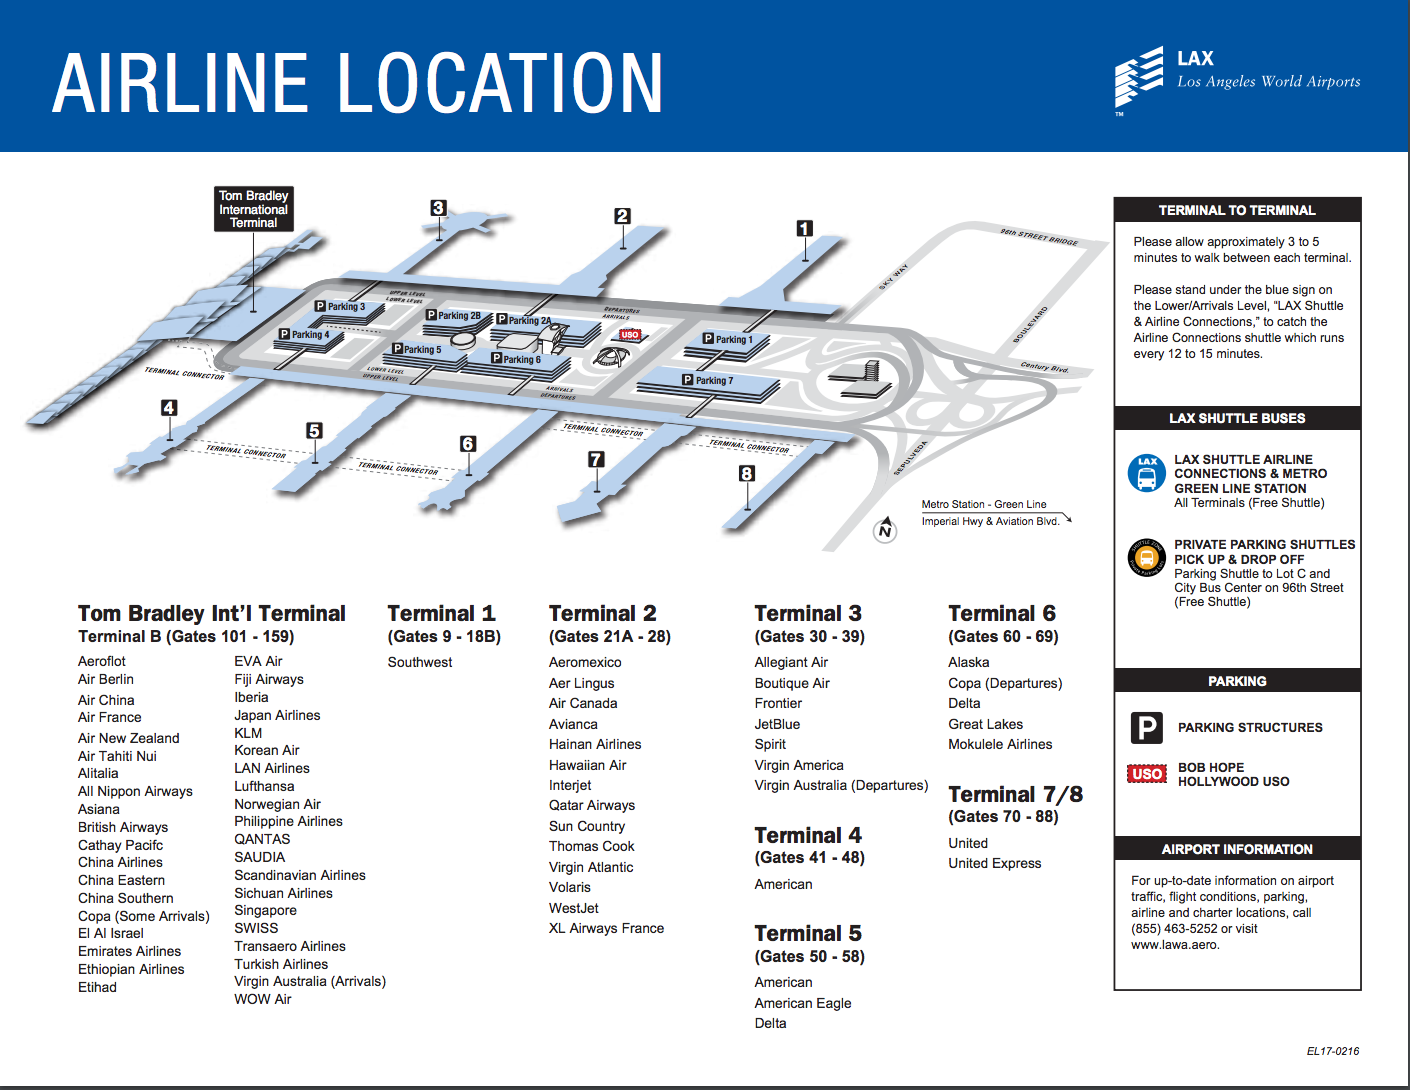 LAX's Current Terminal Map (Image: Los Angeles World Airports)